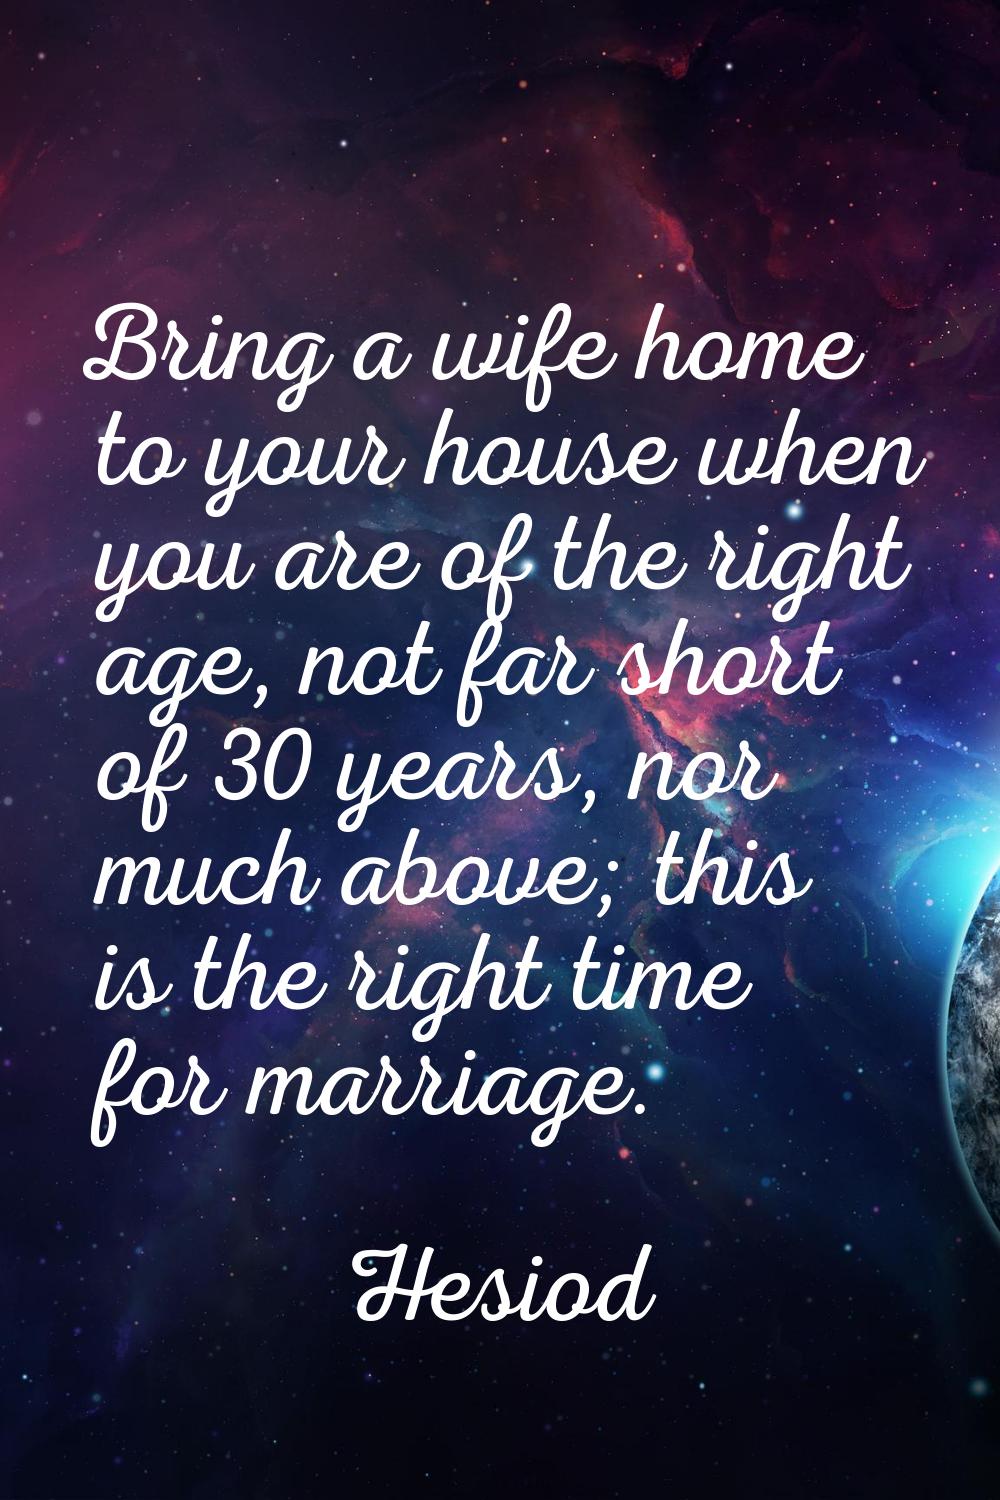 Bring a wife home to your house when you are of the right age, not far short of 30 years, nor much 